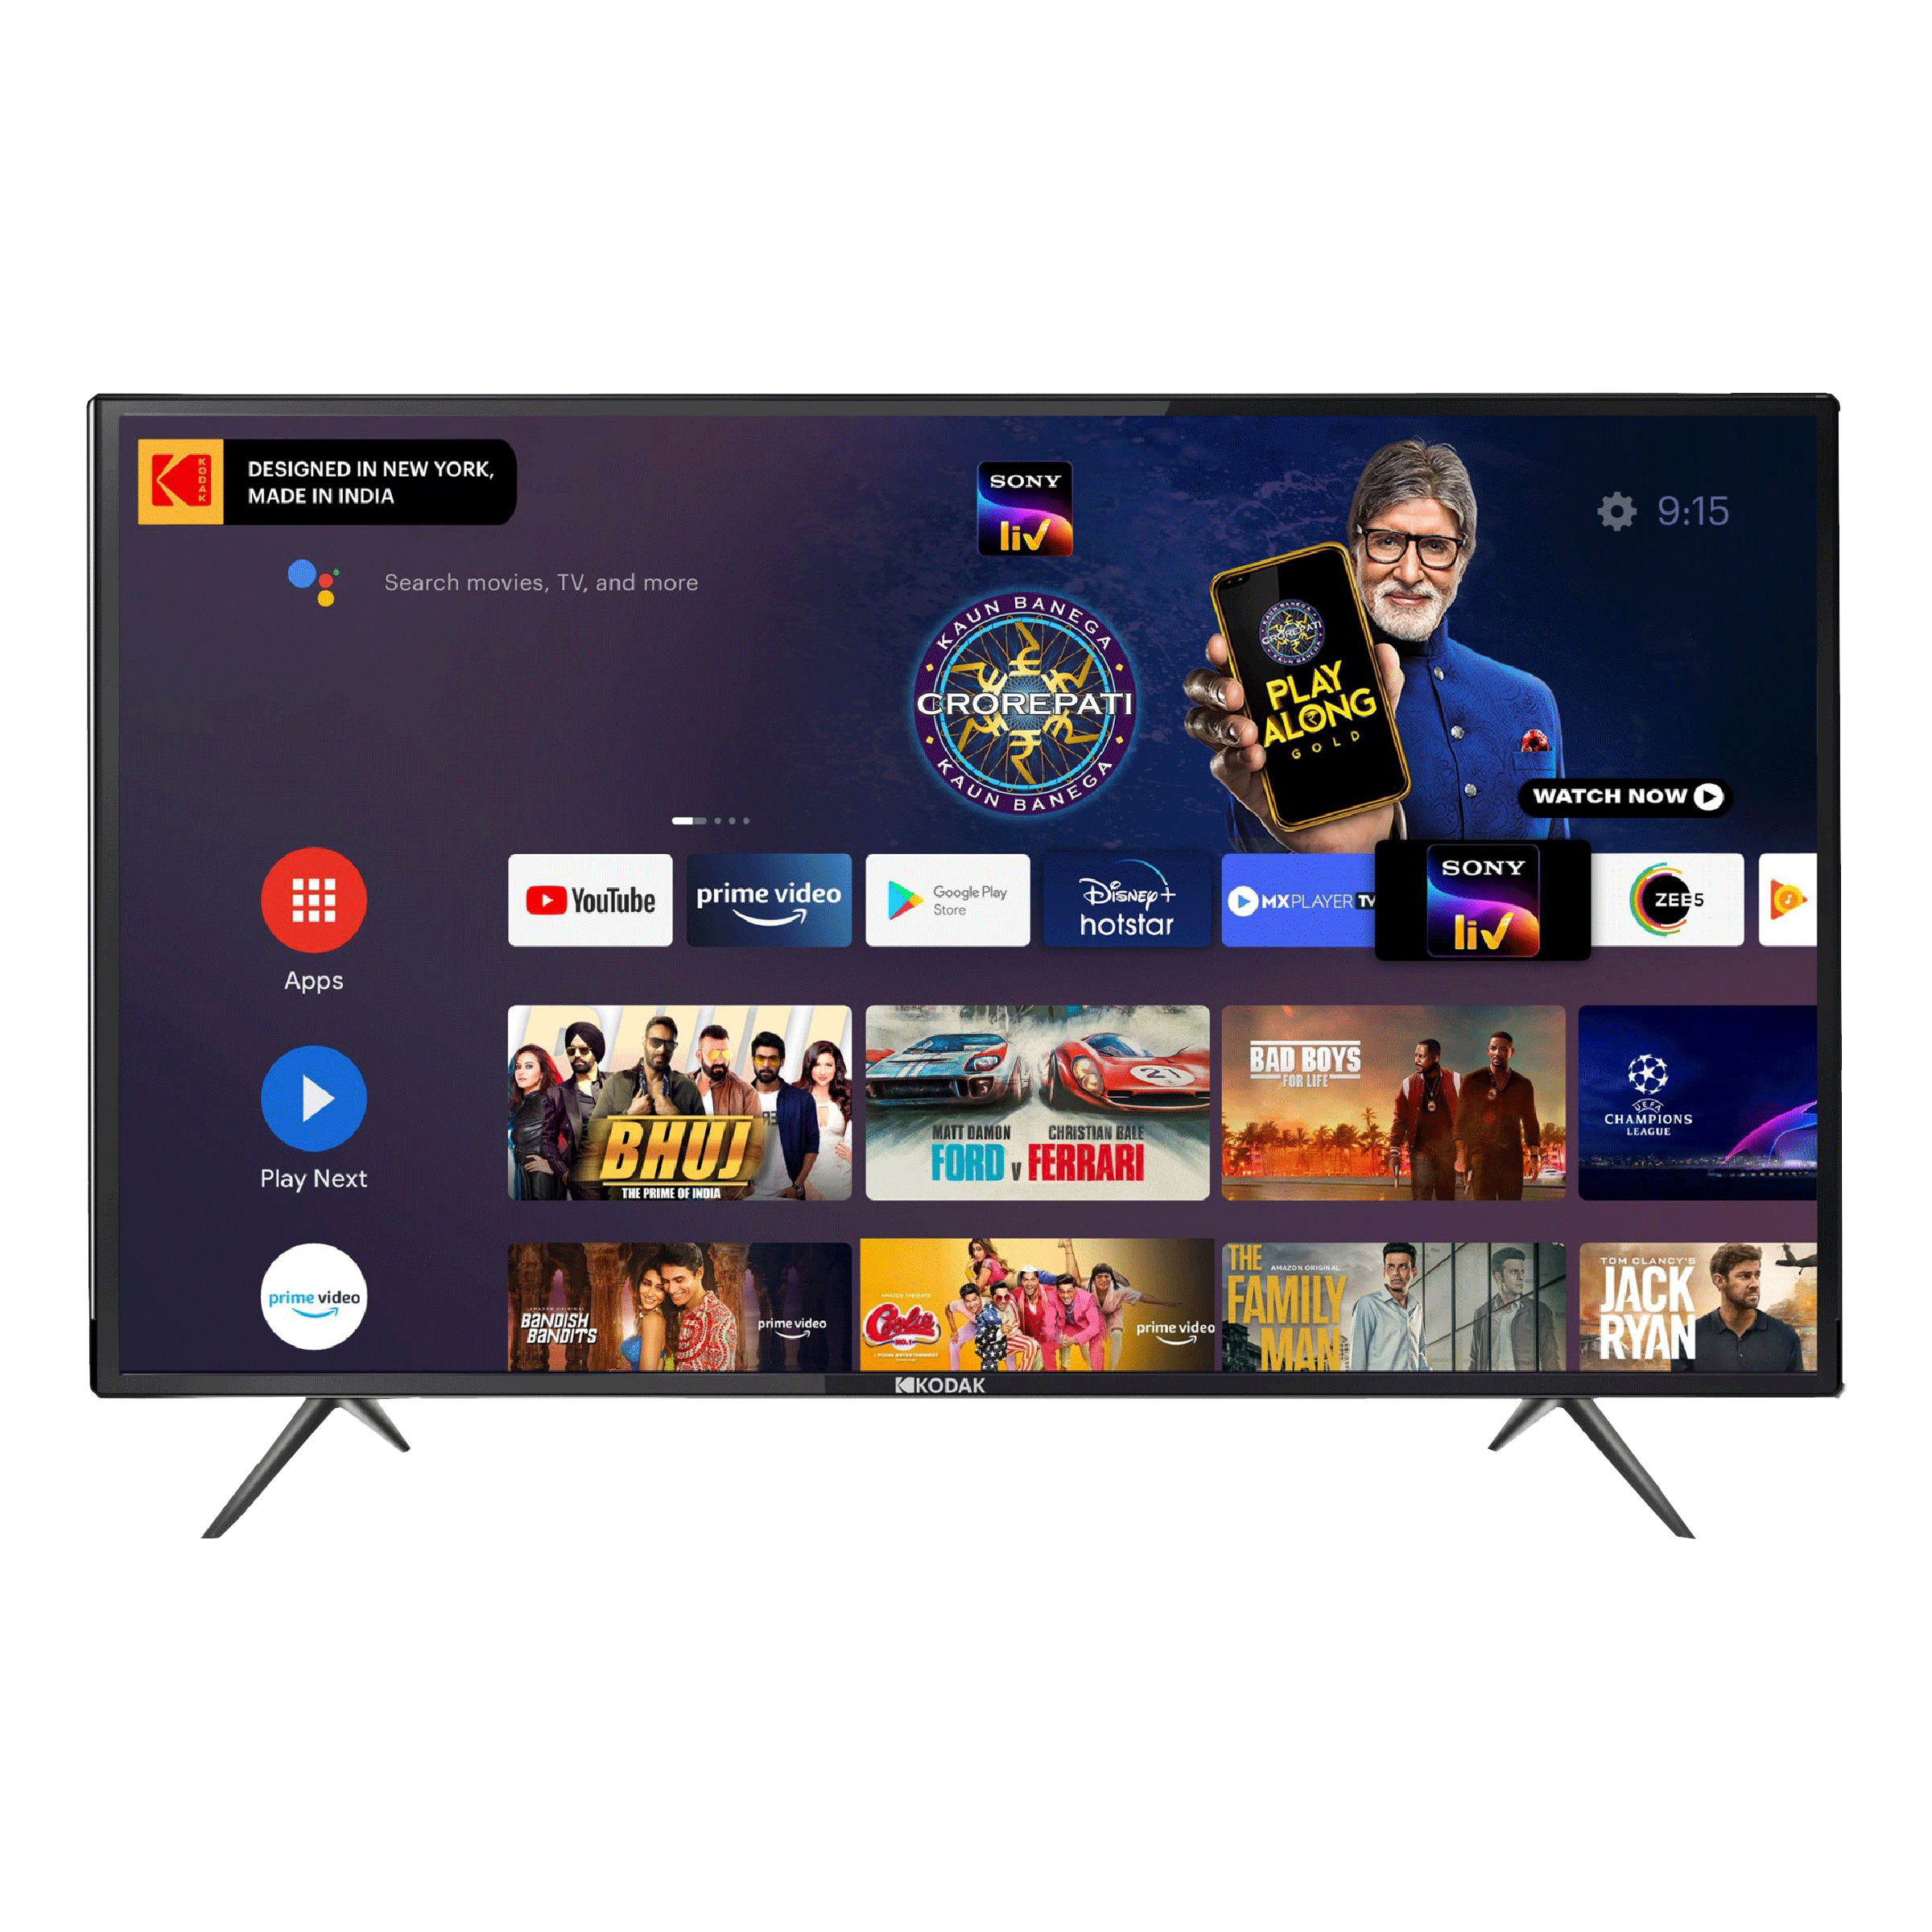 Kodak 7X Pro 108 cm (43 inch) Full HD LED Smart Android TV with Google Assistant (2021 model)_1